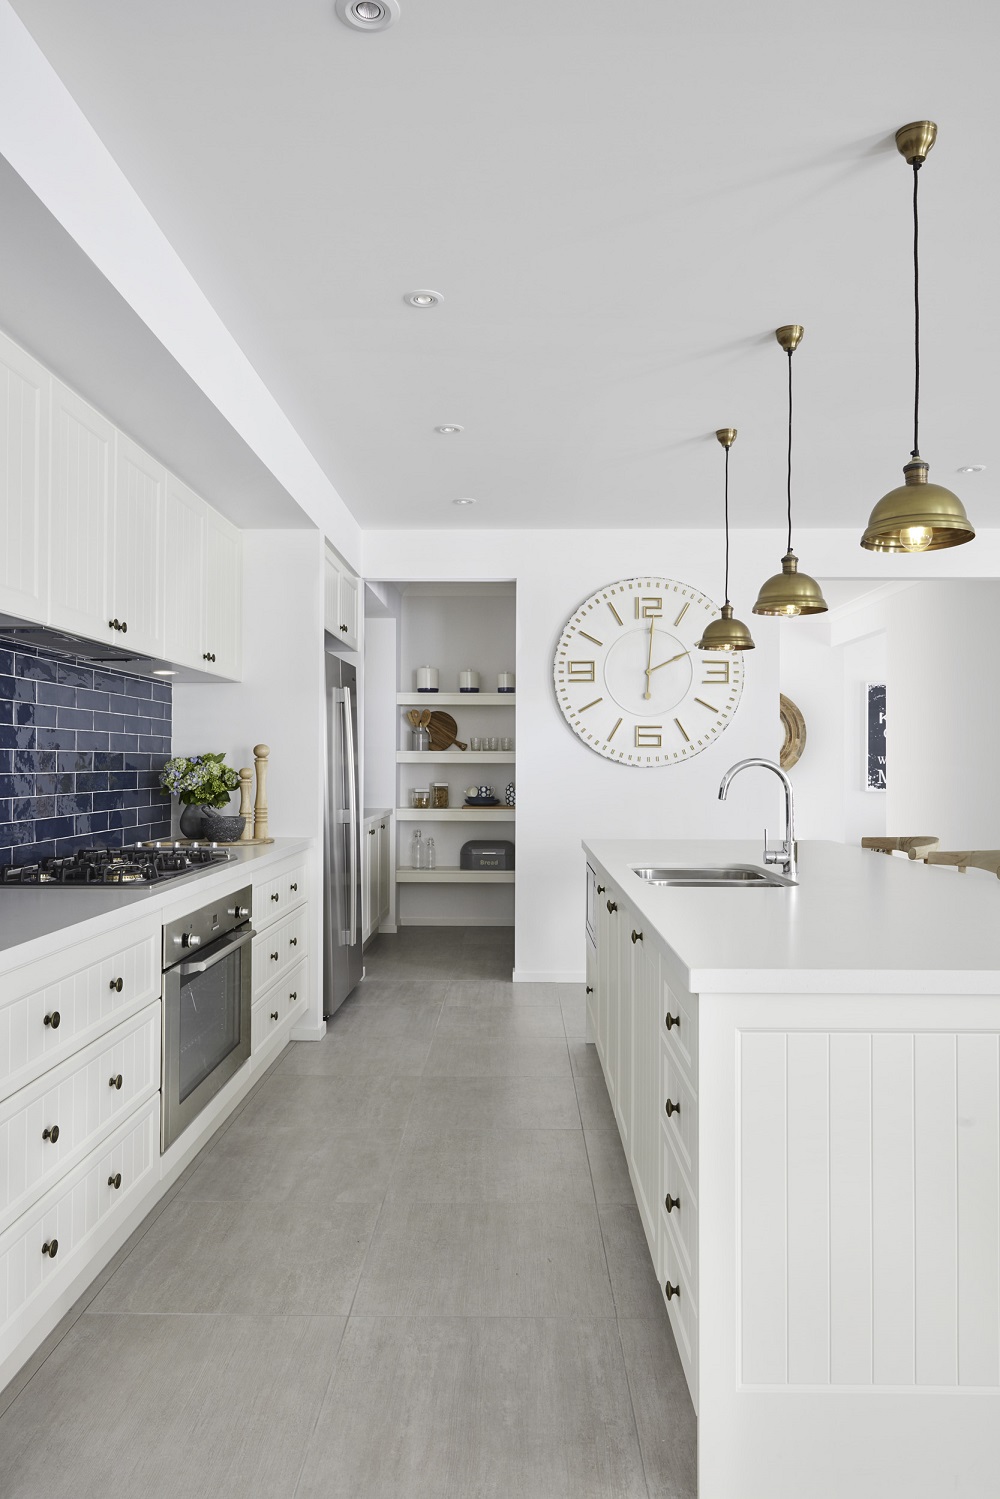 How to select the right kitchen splashback